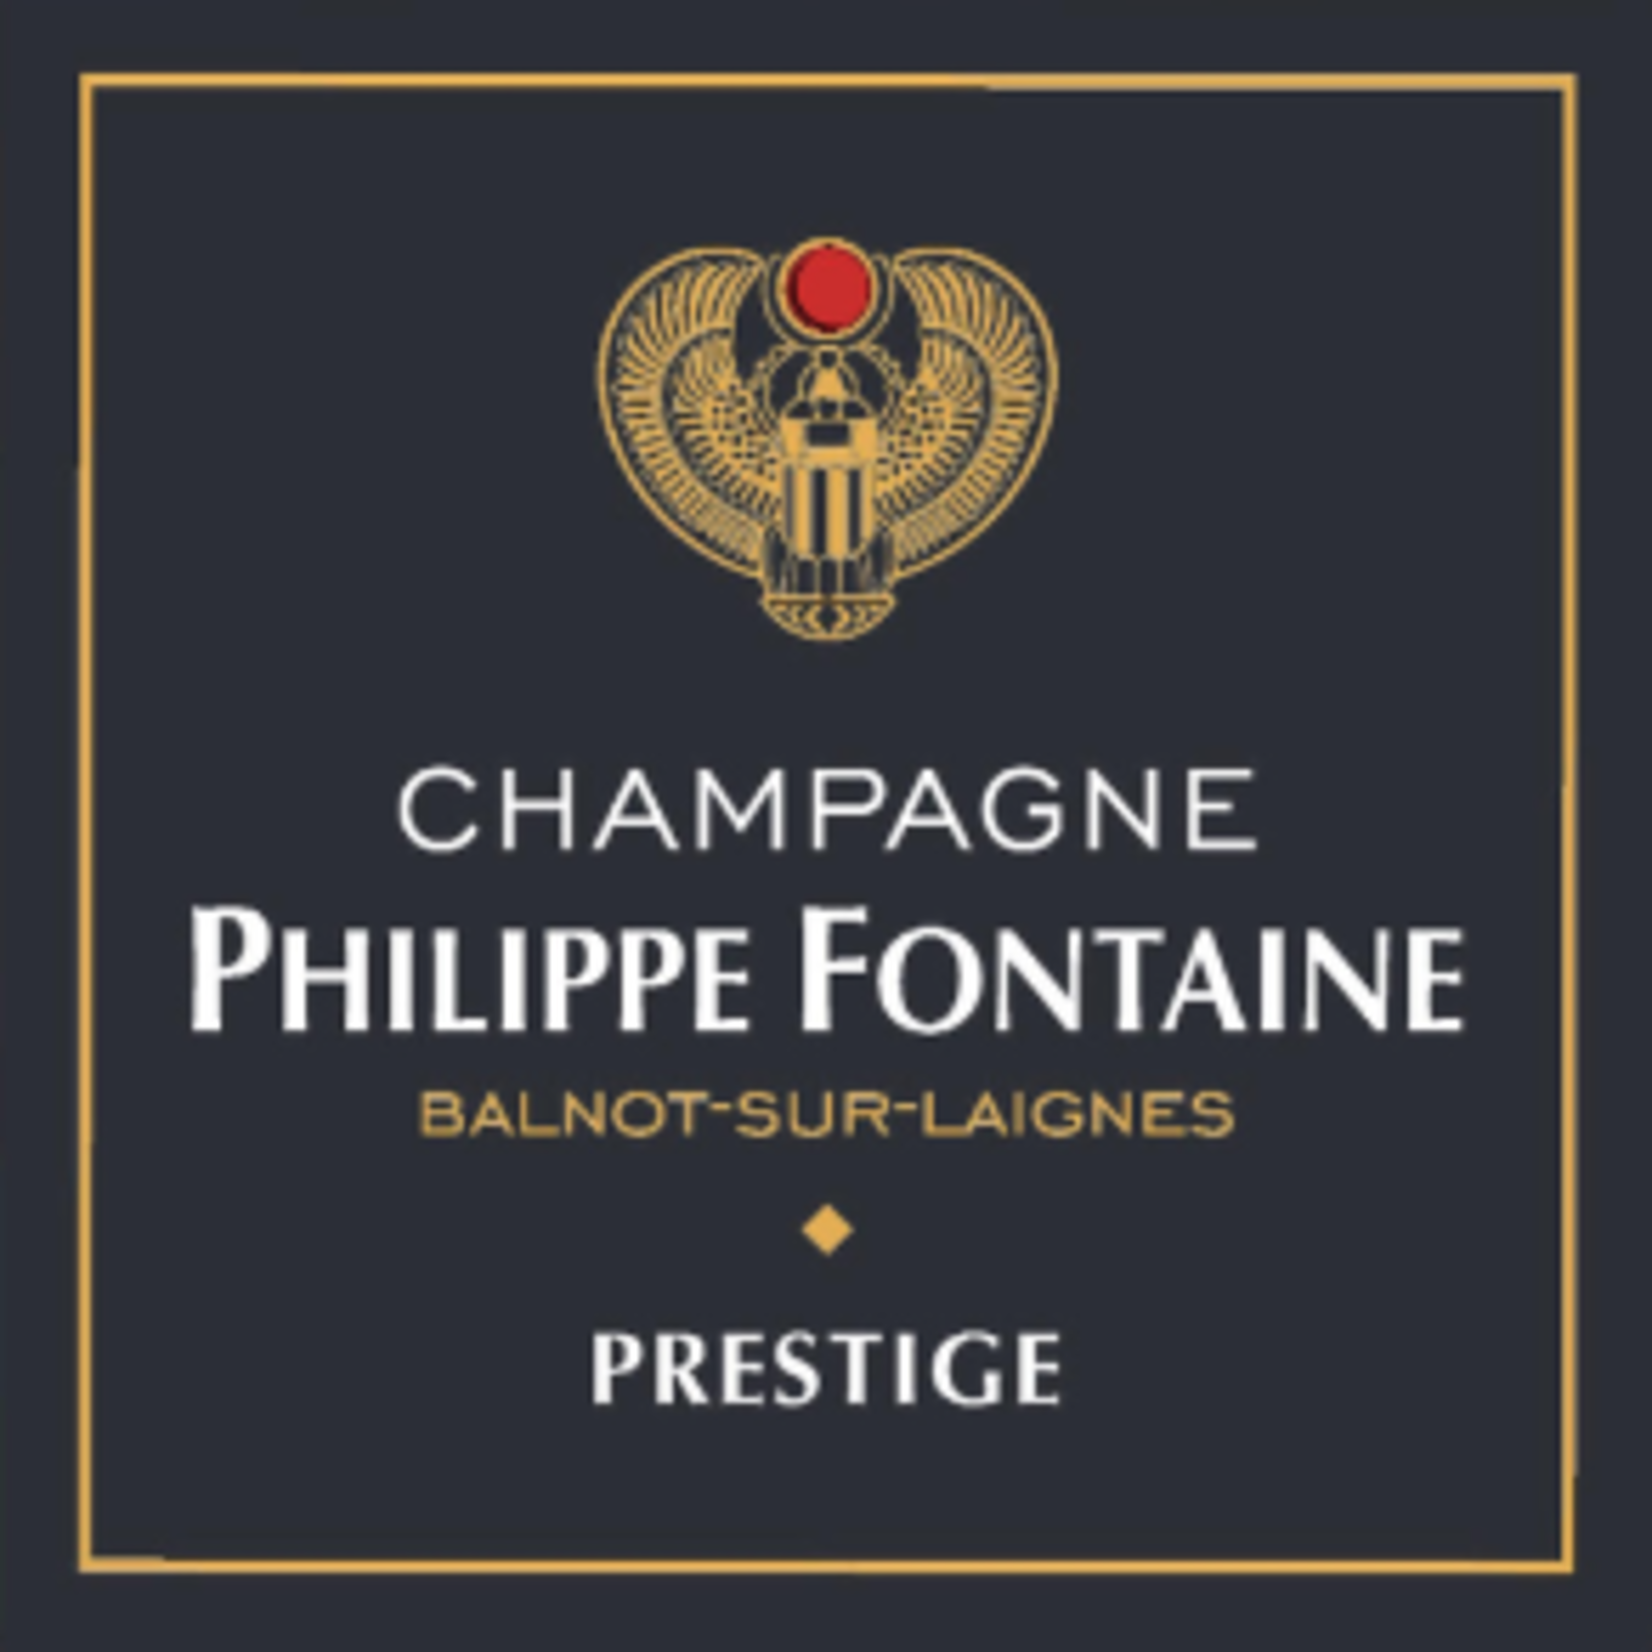 Philippe Fontaine Philippe Fontaine NV Tradition Brut Champagne Champagne, France